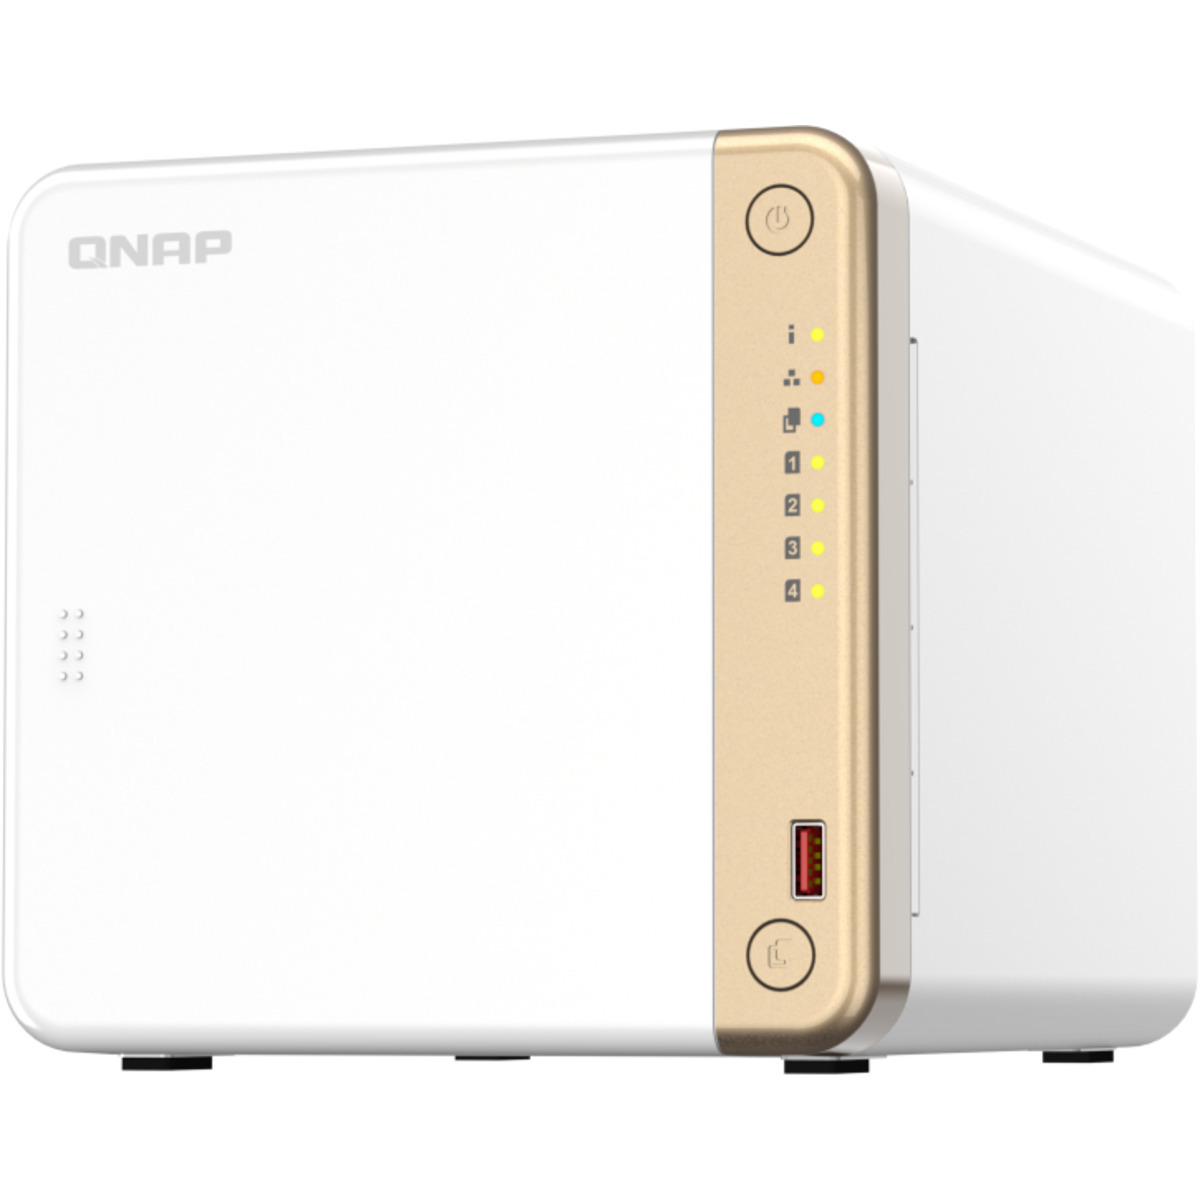 QNAP TS-462 32tb 4-Bay Desktop Multimedia / Power User / Business NAS - Network Attached Storage Device 4x8tb Seagate IronWolf Pro ST8000NT001 3.5 7200rpm SATA 6Gb/s HDD NAS Class Drives Installed - Burn-In Tested - ON SALE TS-462